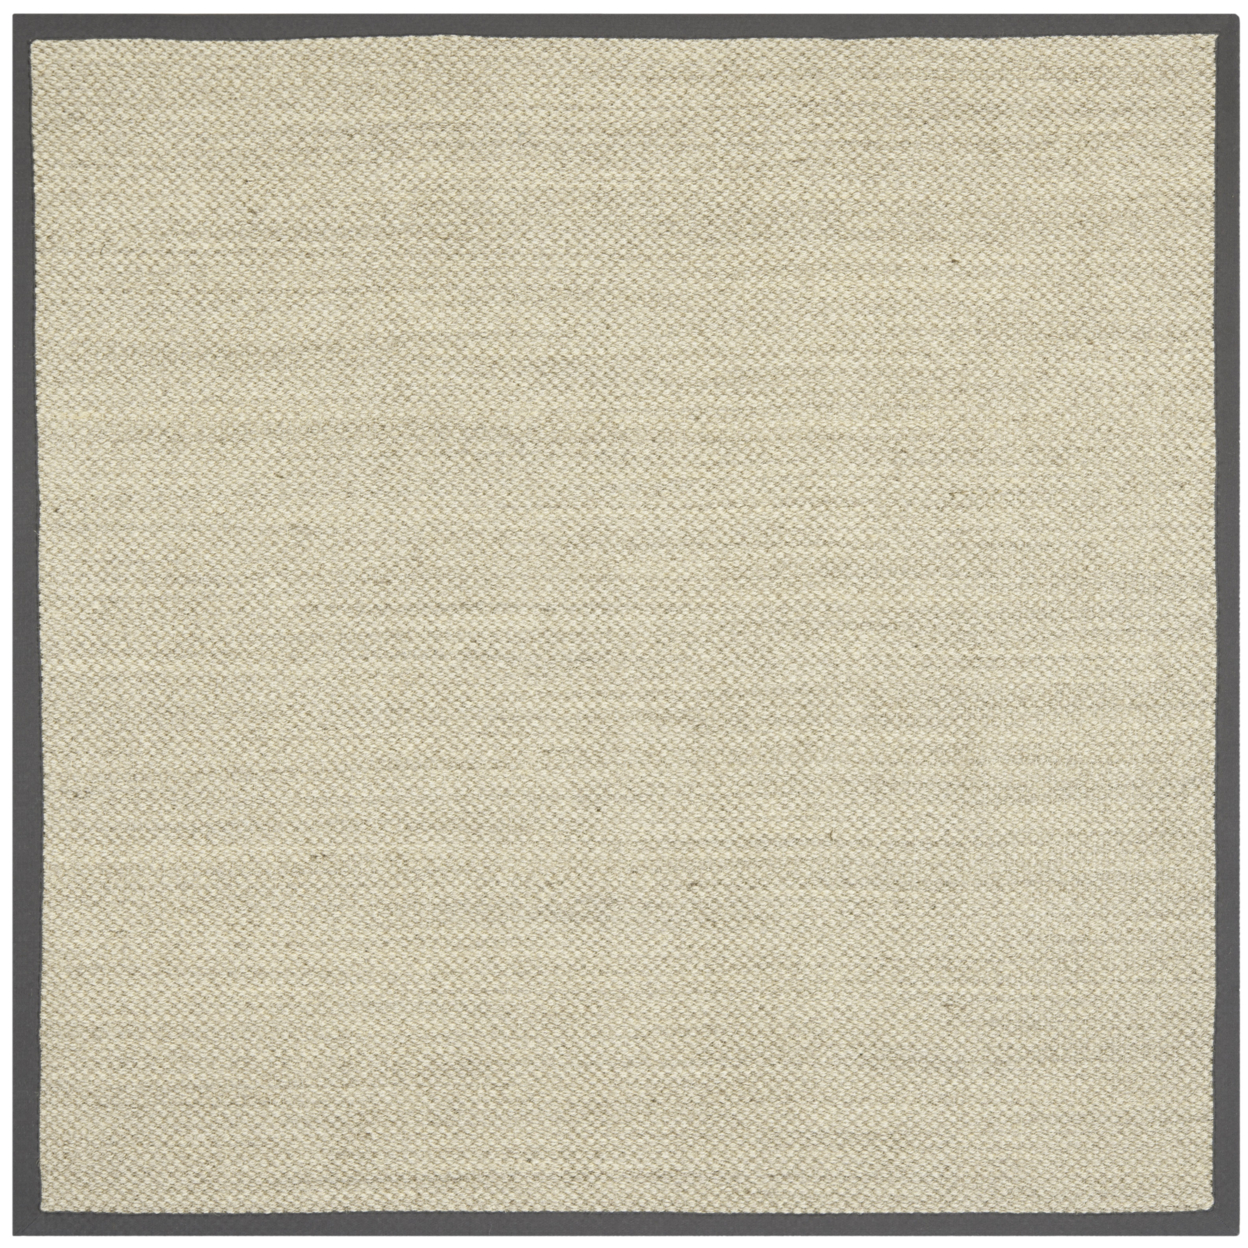 SAFAVIEH Natural Fiber Collection NF443B Marble/Grey Rug - 7' Square